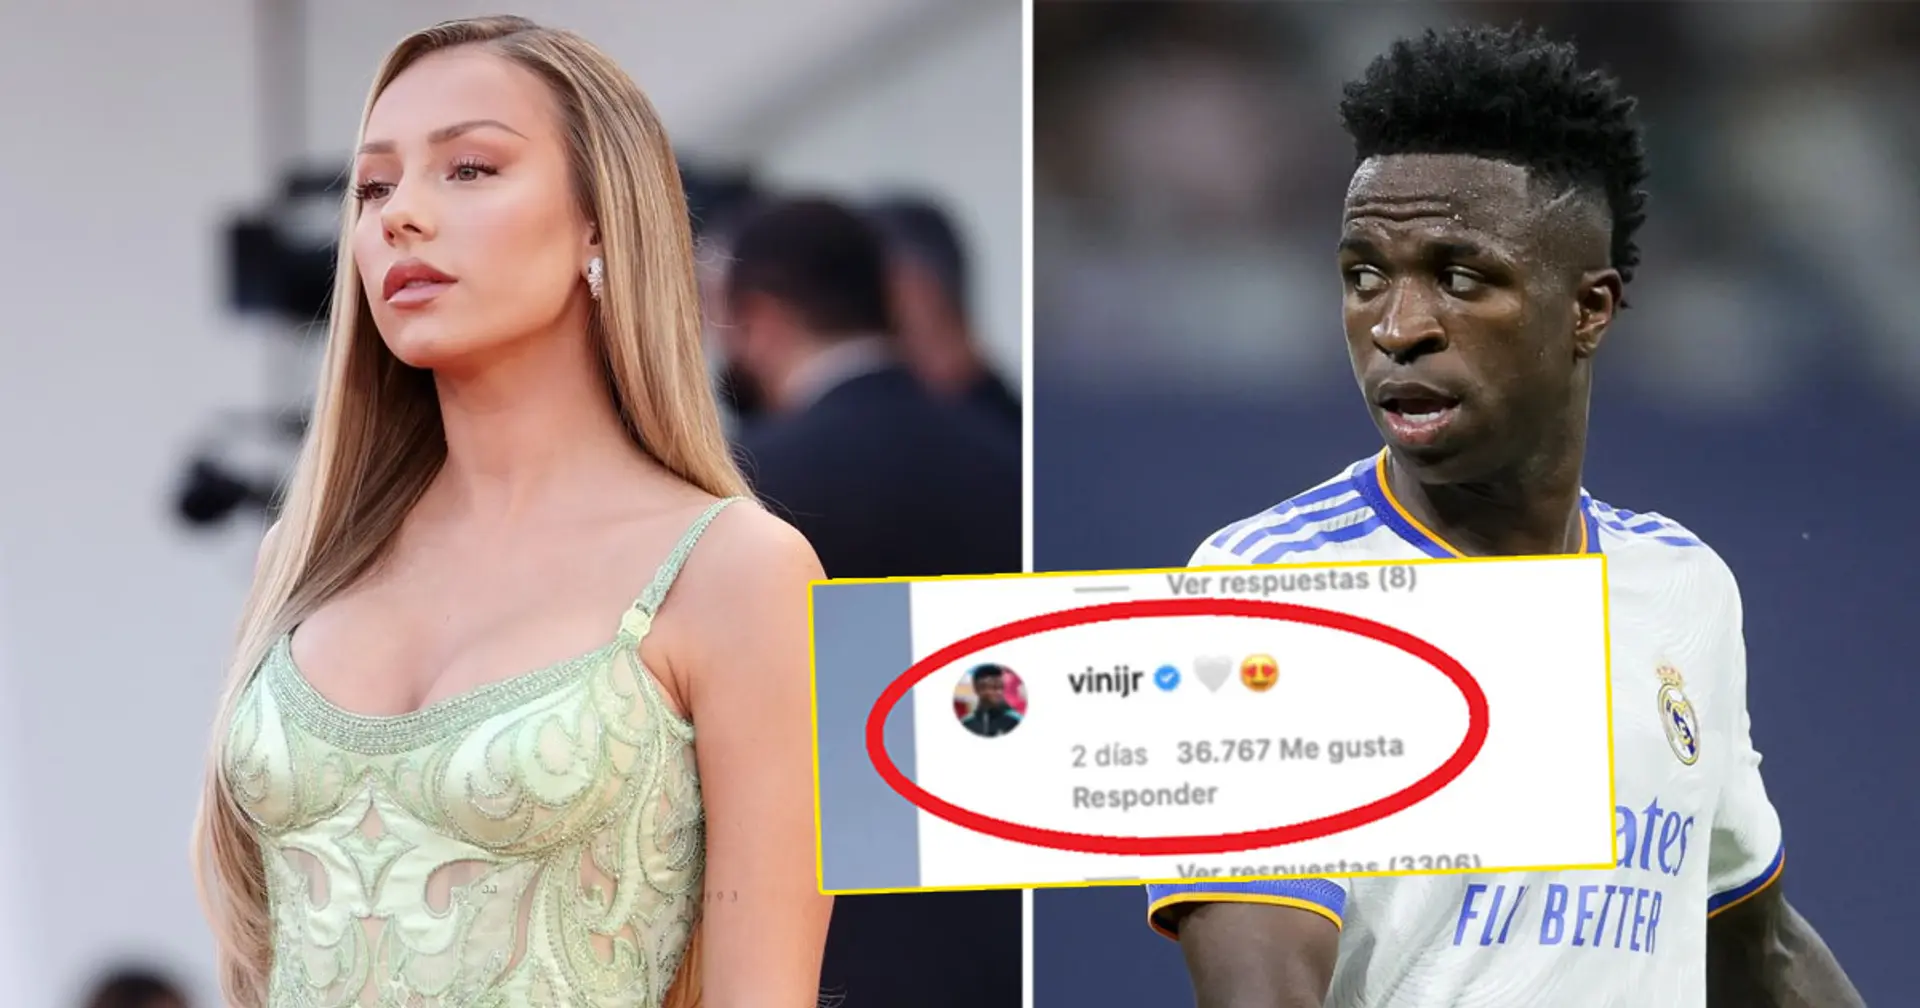 Famous Spanish actress seemingly denies having any relationship with Vinicius: explained